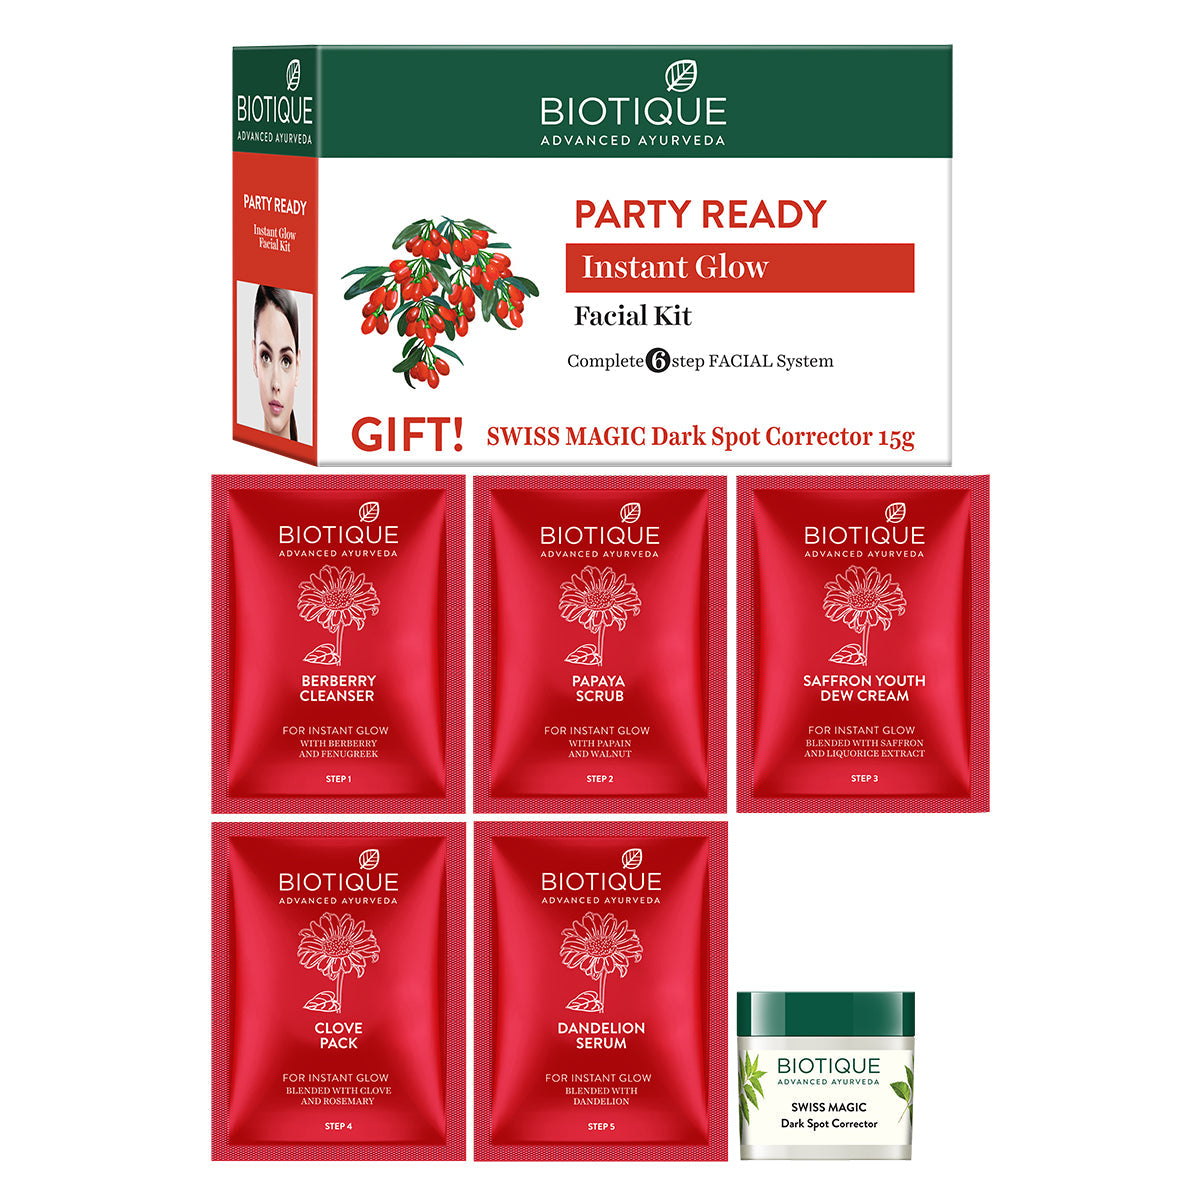 PARTY READY Instant Glow FACIAL KIT 5x10g+15g